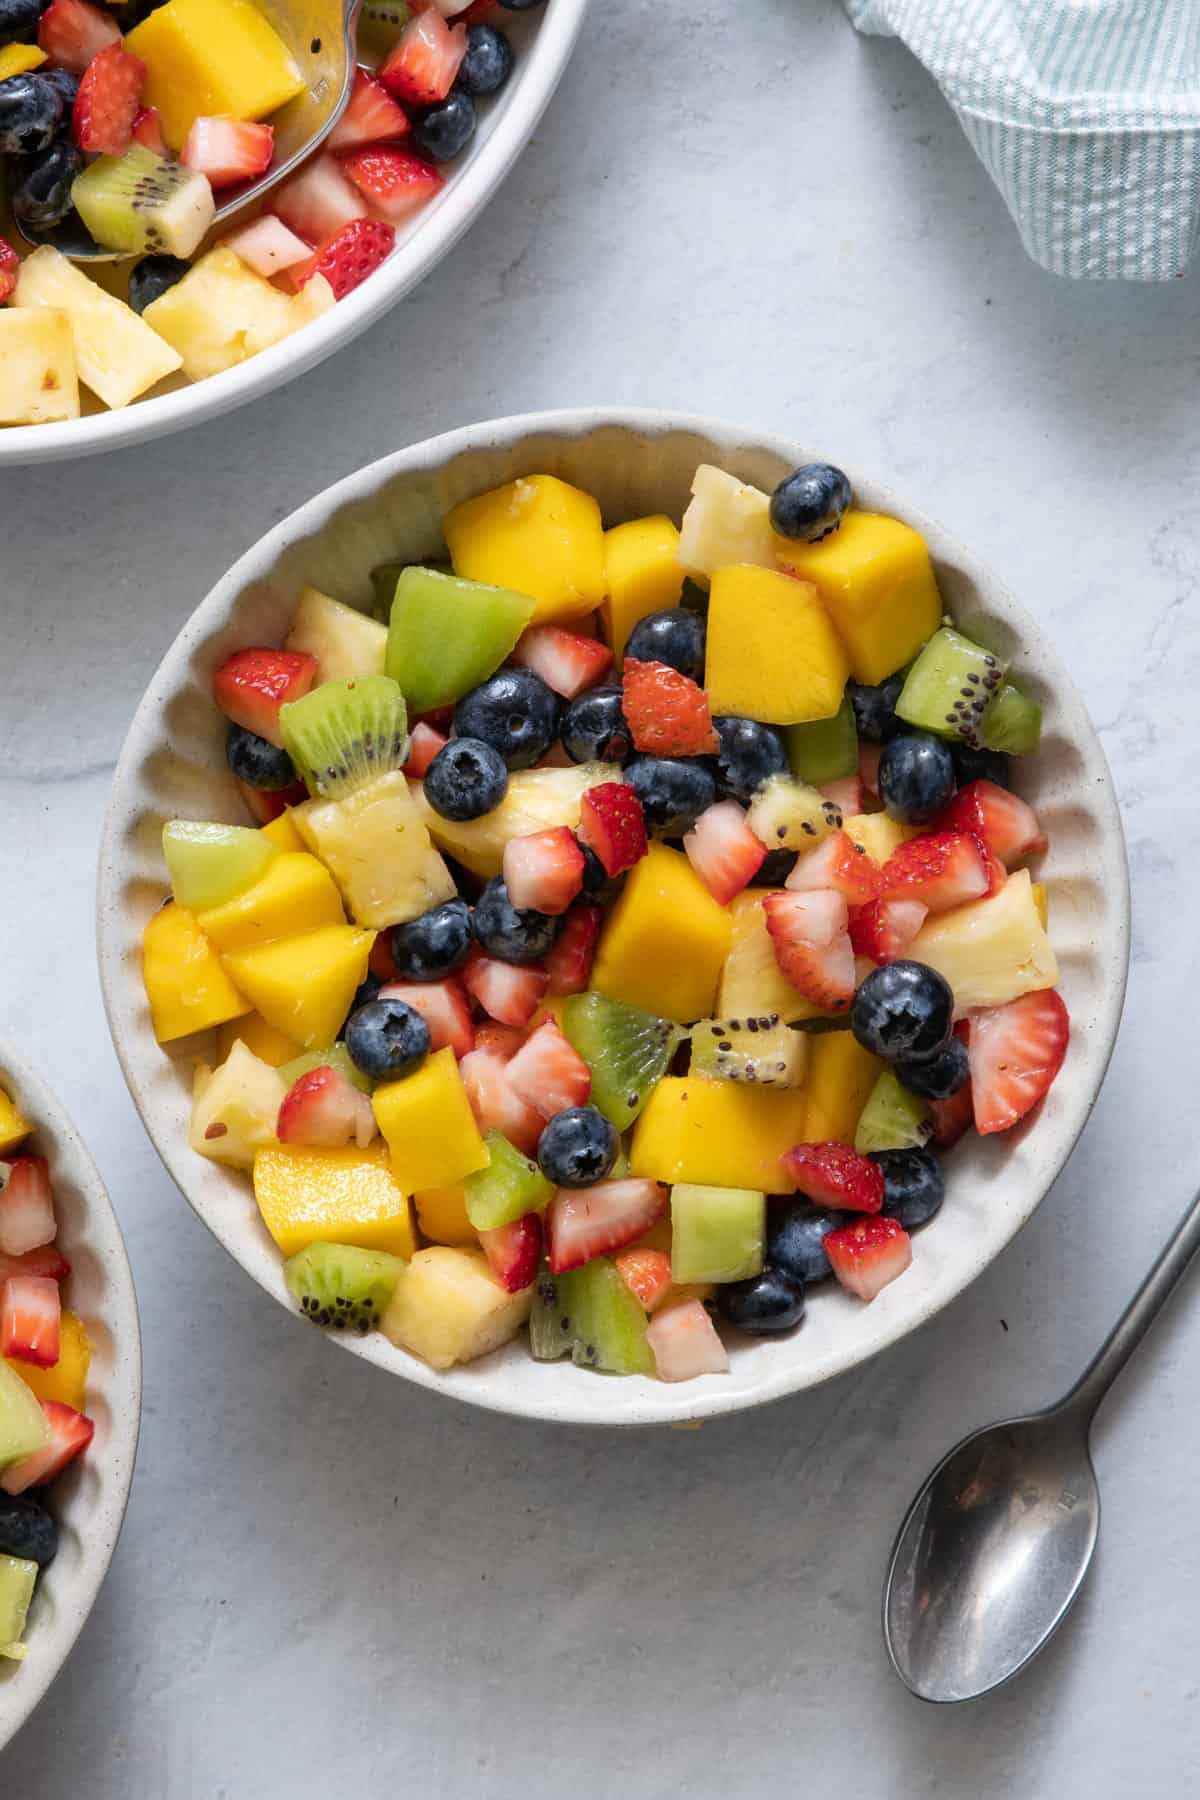 Overhead image of fruit salad with spoon on side of dish.